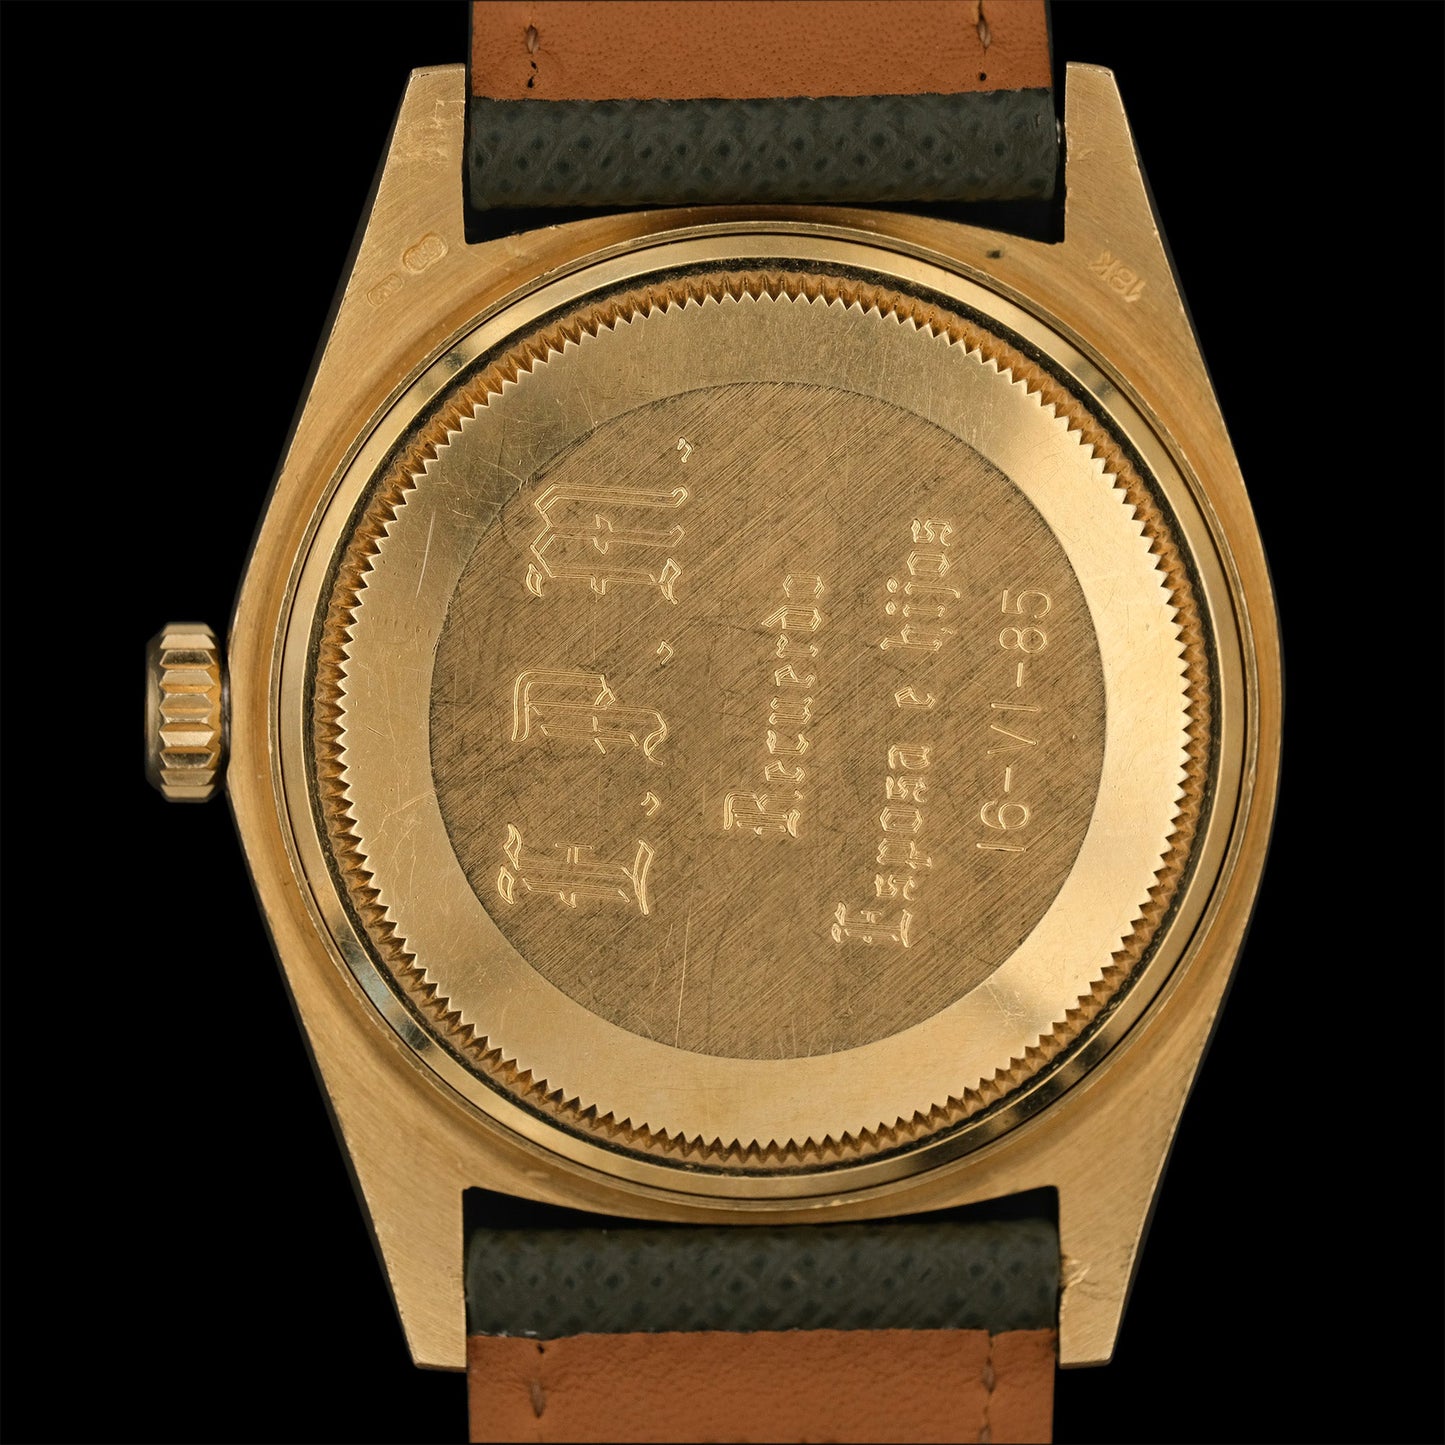 Rolex Day-Date 18038 Wood Dial from 1980